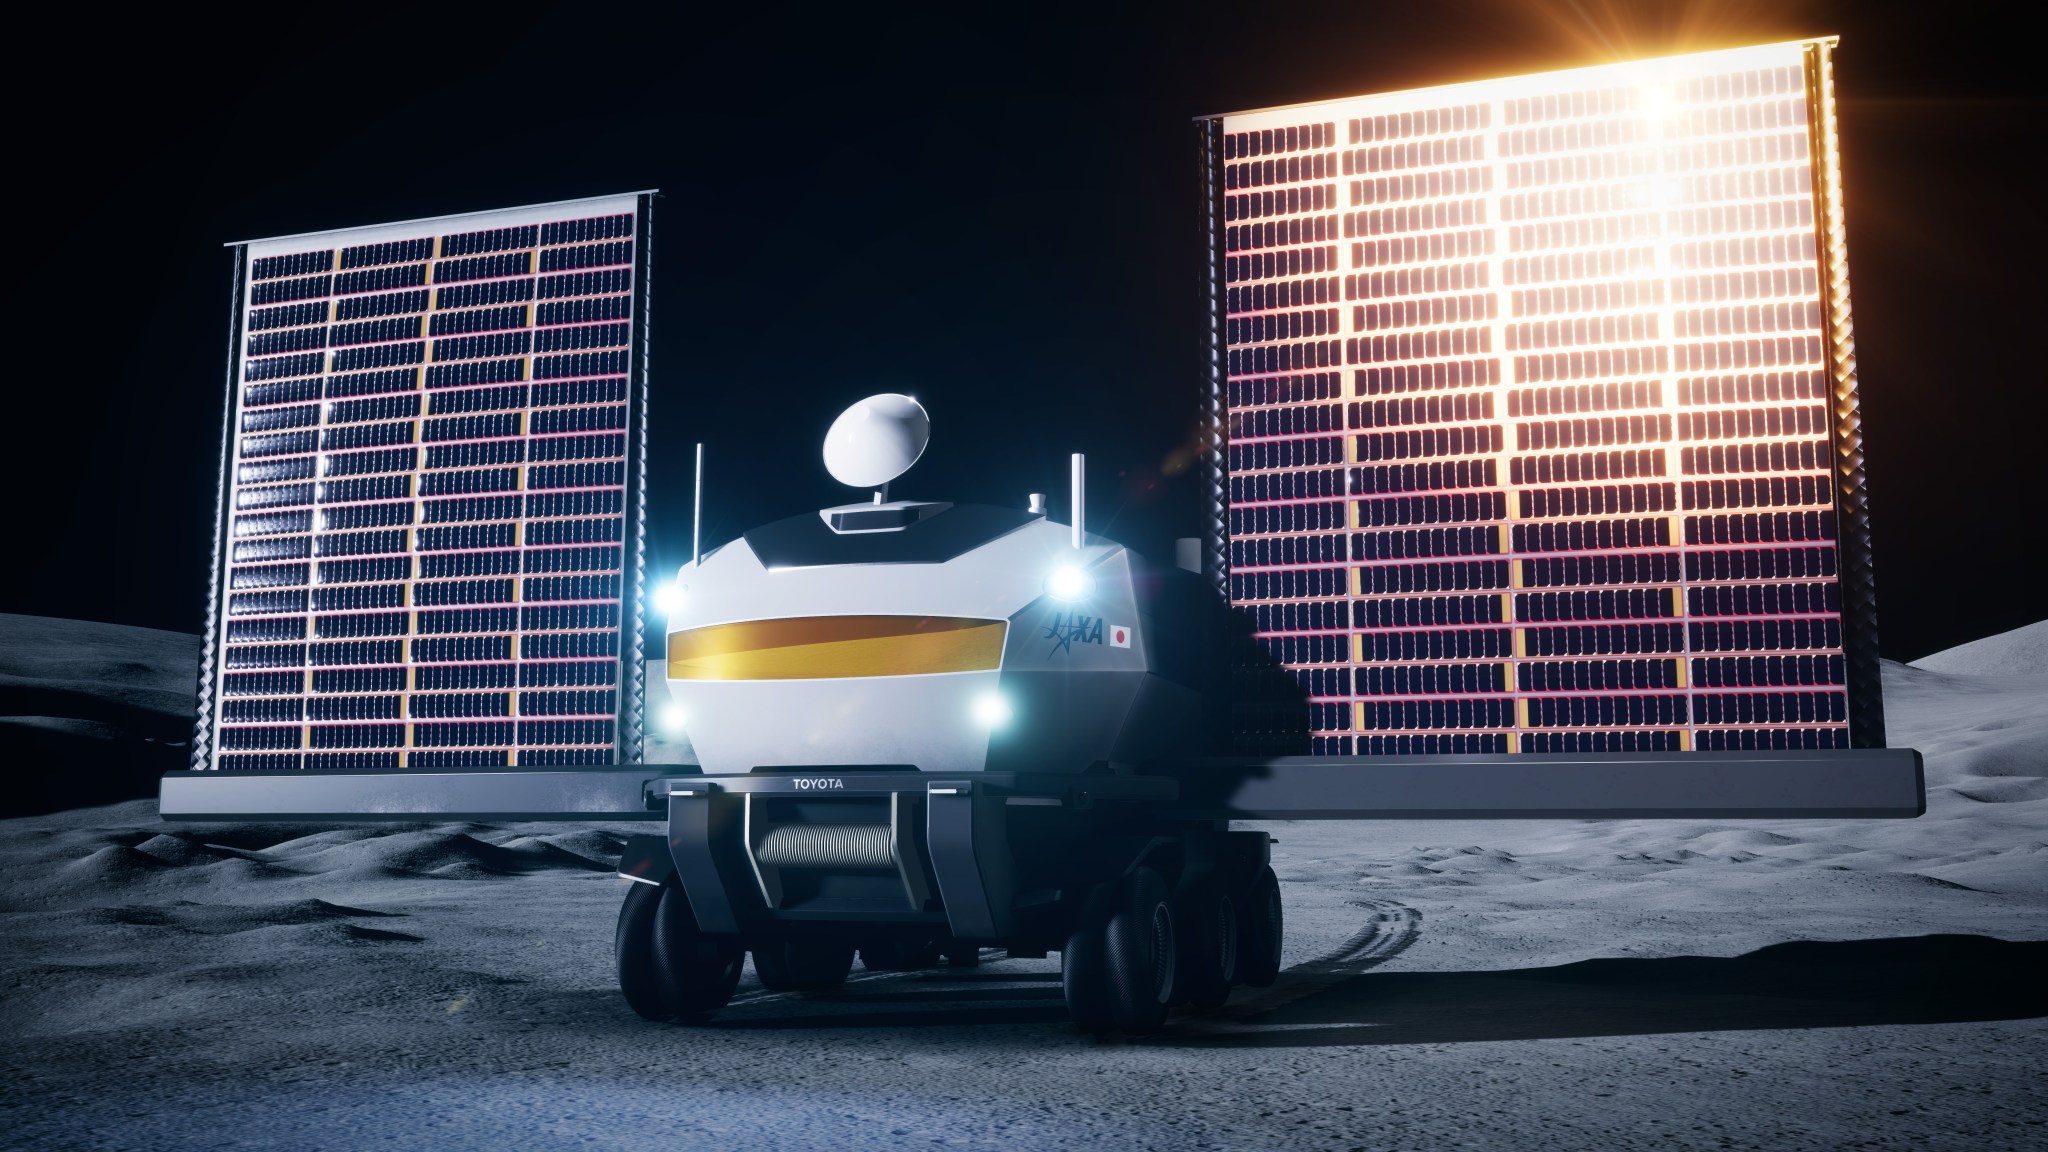 A concept image of JAXA's (Japan Aerospace Exploration Agency) pressurized rover on the Moon with two solar arrays deployed.